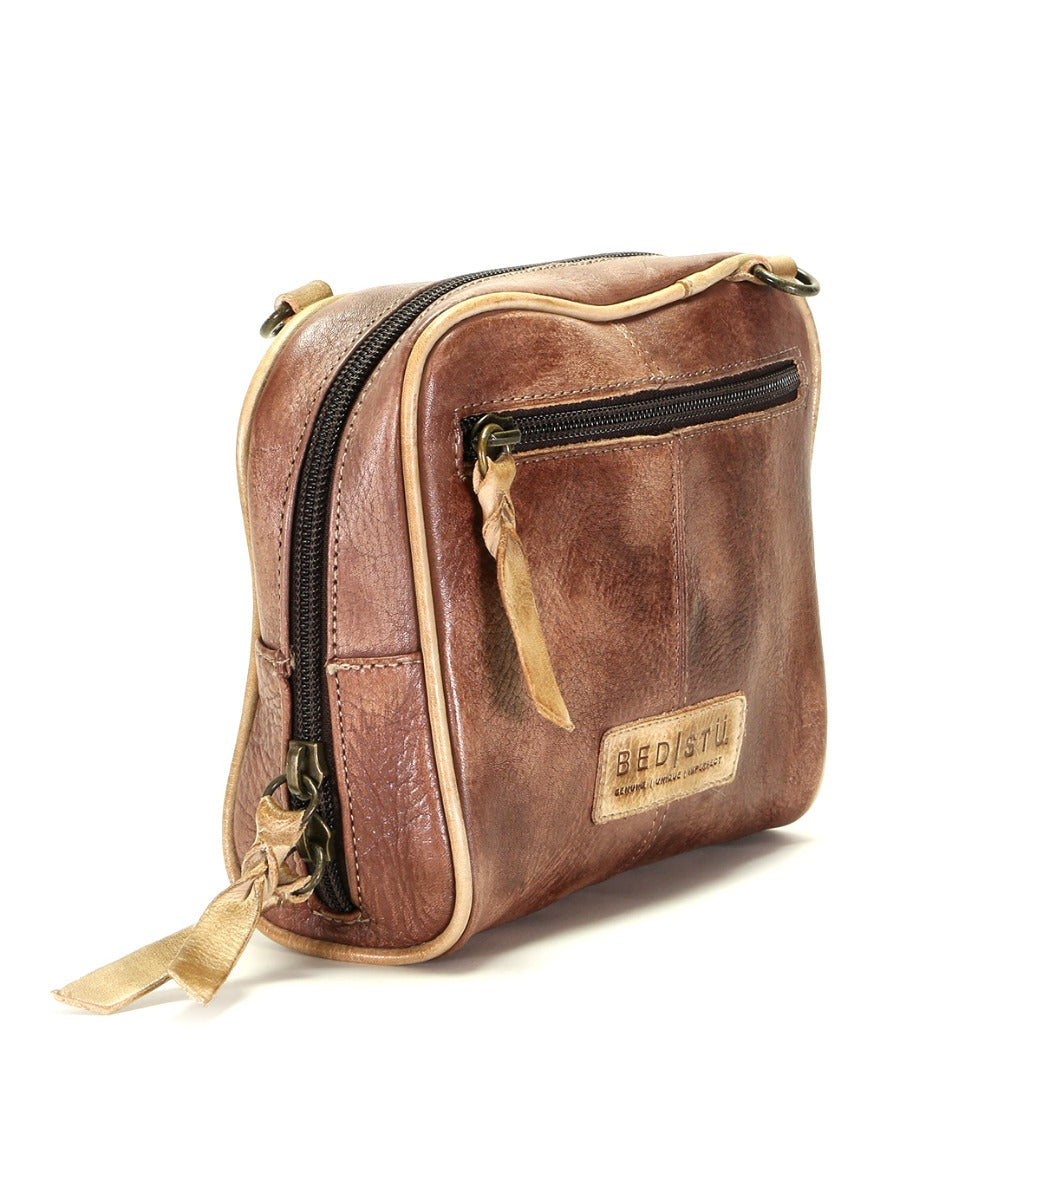 A Capture brown leather cross body bag with a zipper from Bed Stu.